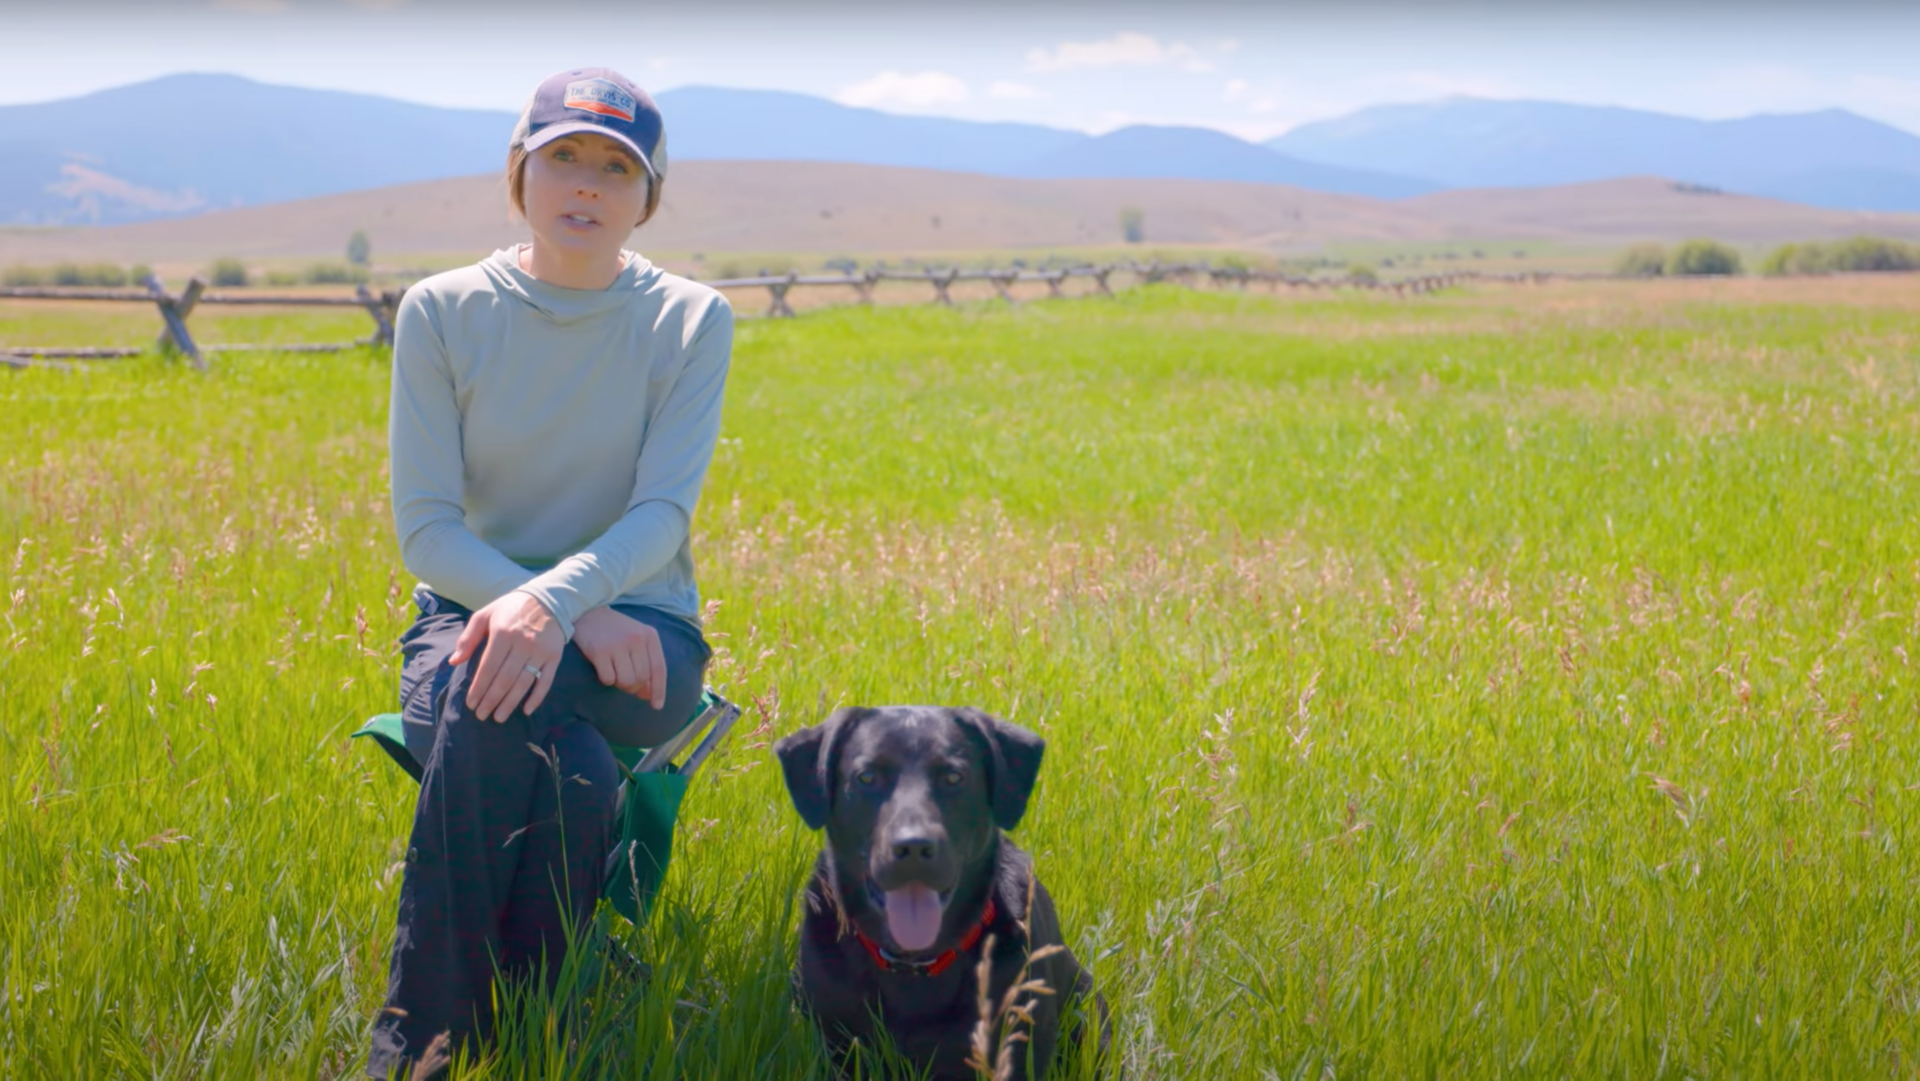 A woman and her panting dog sitting in the tall grass in an open field.